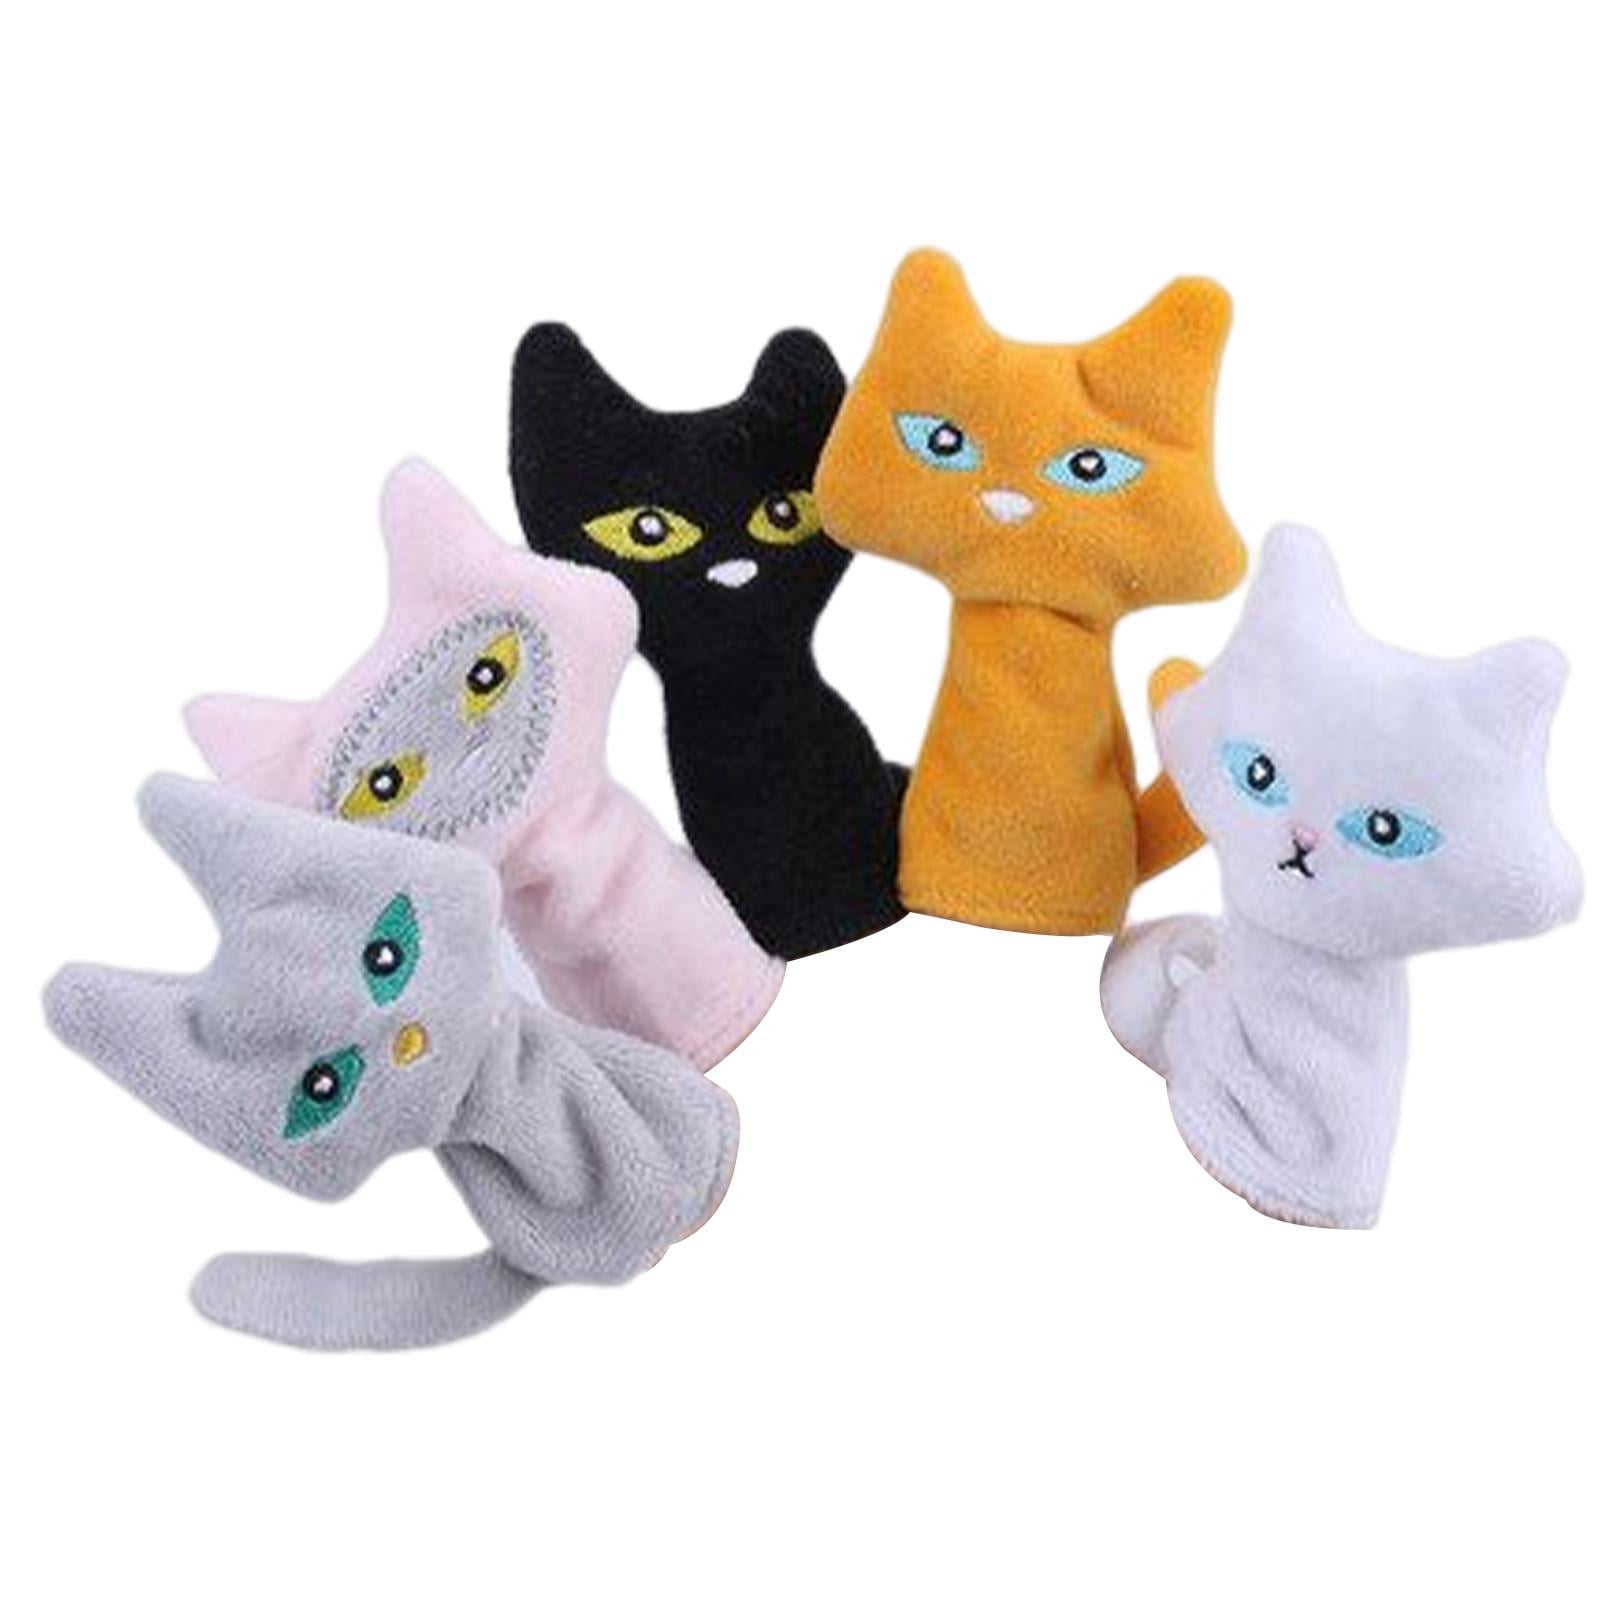 5x Colorful Animals Finger Puppets Cloth Doll Baby Educational Hand Toy 8C 